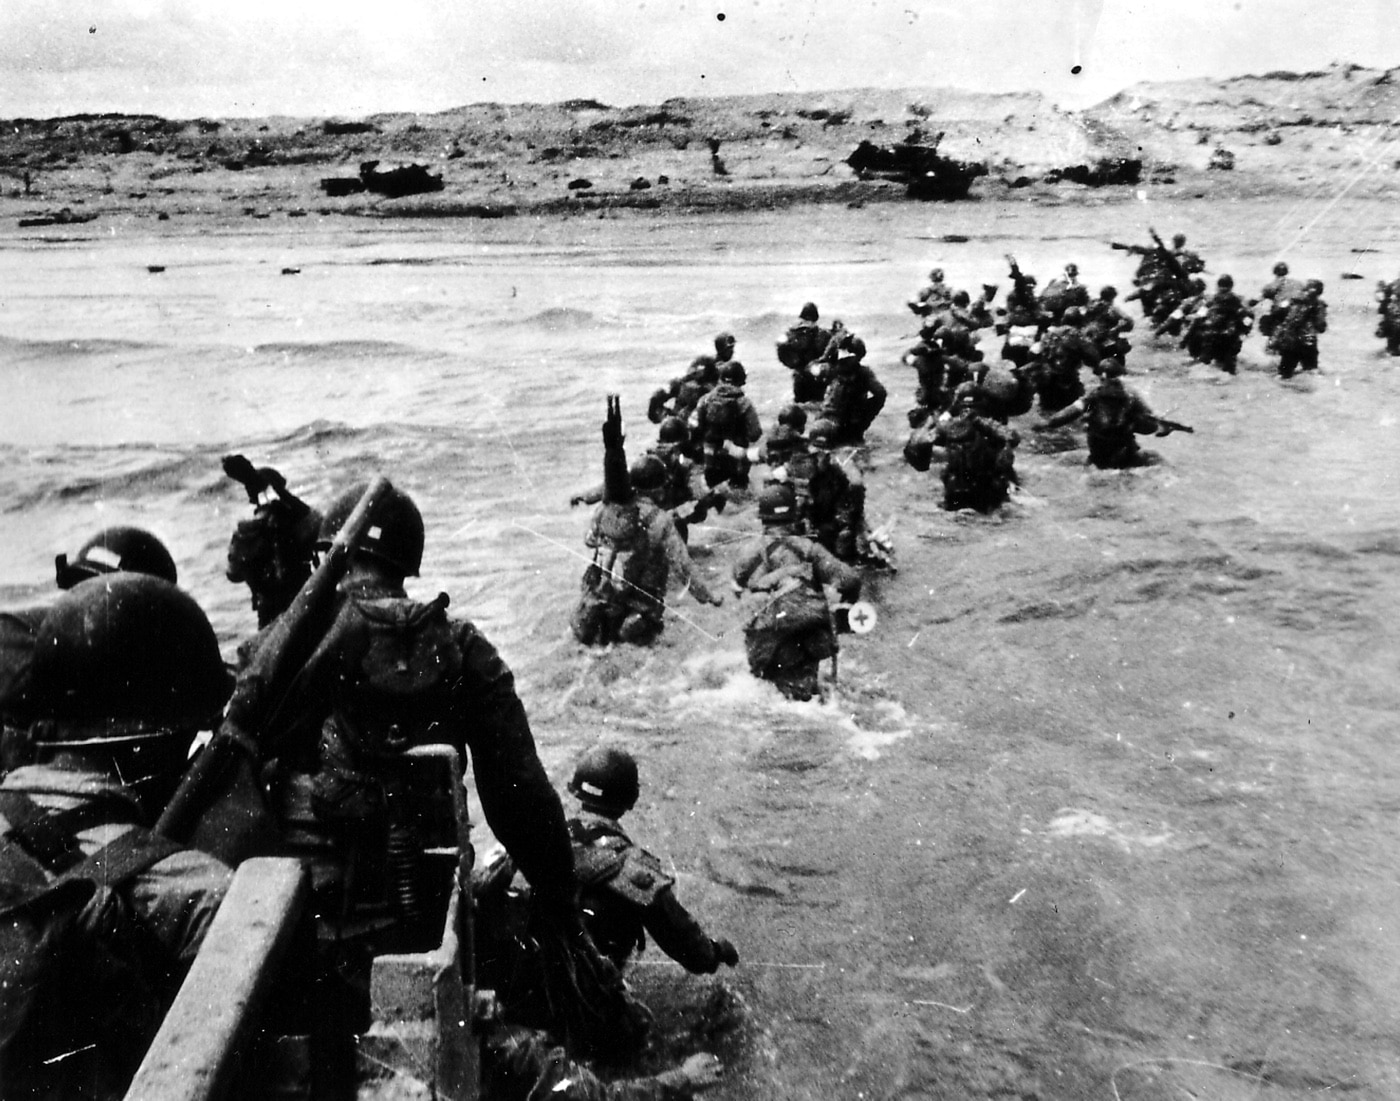 Here we see American troops wade onto the beaches during D-Day. During the morning of the attack, the troops were under constant fire from machine guns, mortars and artillery.